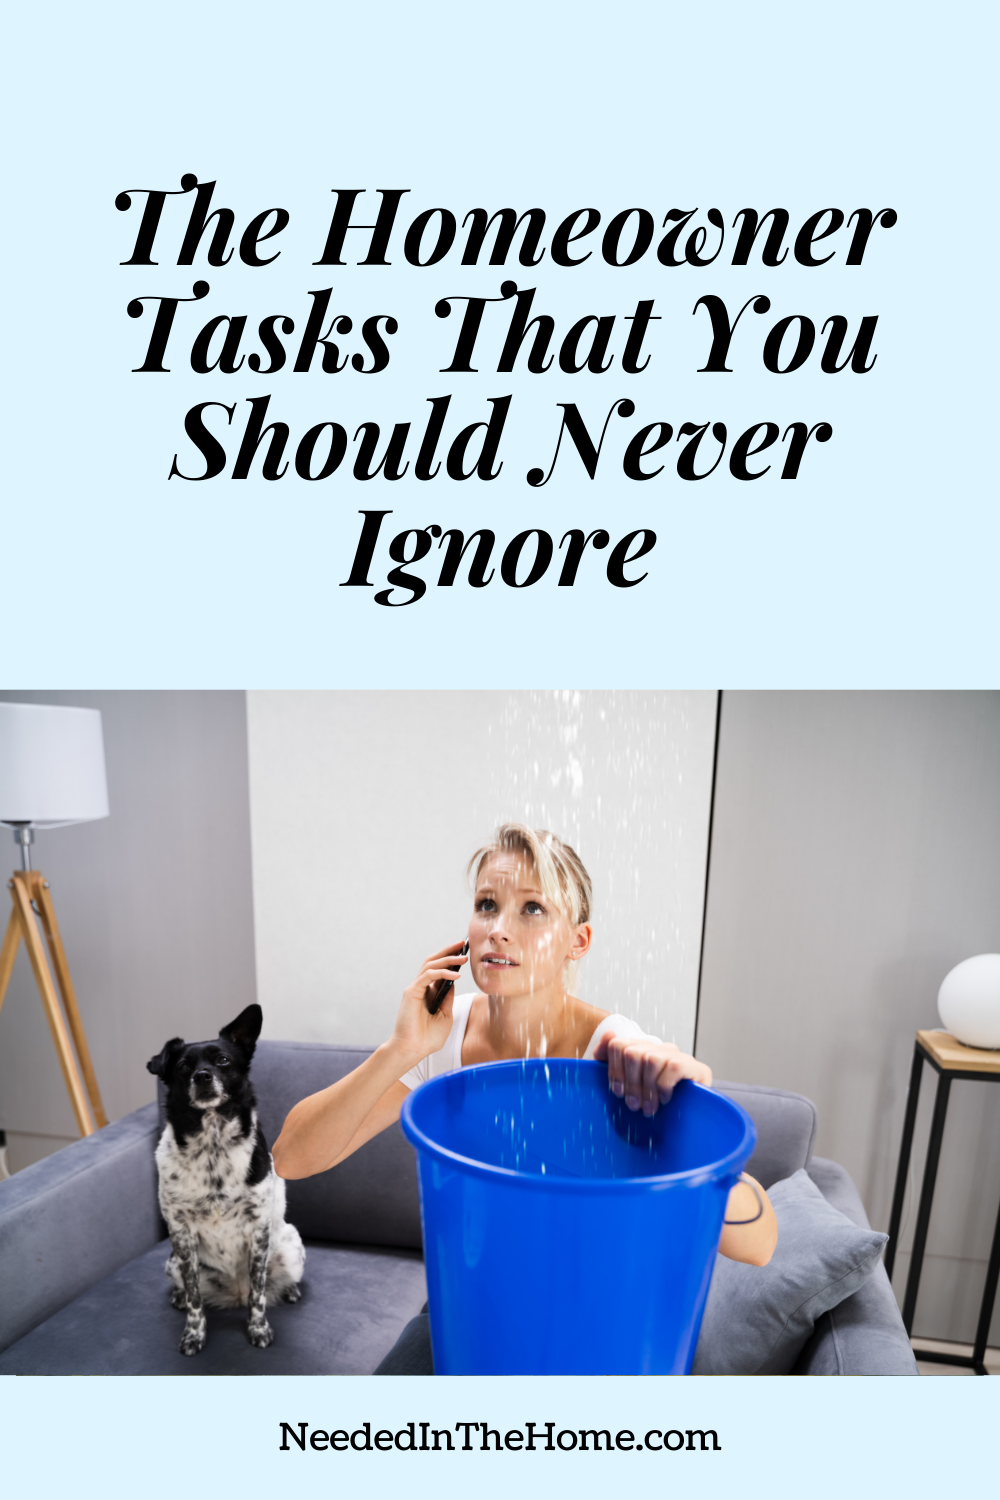 pinterest-pin-description the homeowner tasks that you should never ignore woman on telephone holding bucket to catch drips from leak in ceiling with dog on couch living room neededinthehome